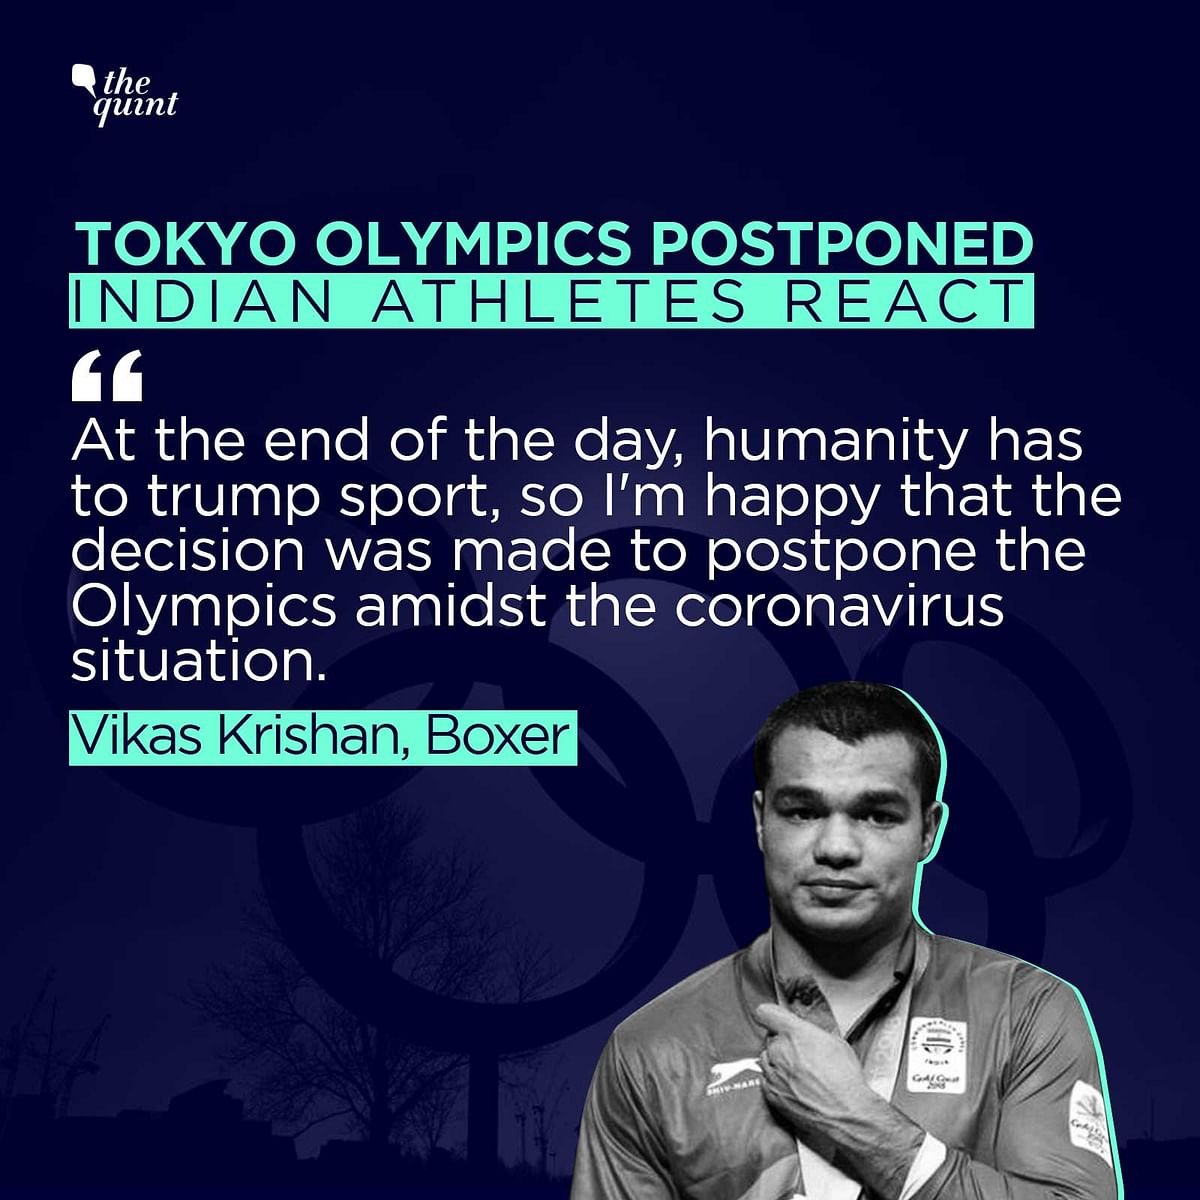 India’s Olympic-bound athletes  hailed the decision to postpone the Tokyo Olympics due to coronavirus.